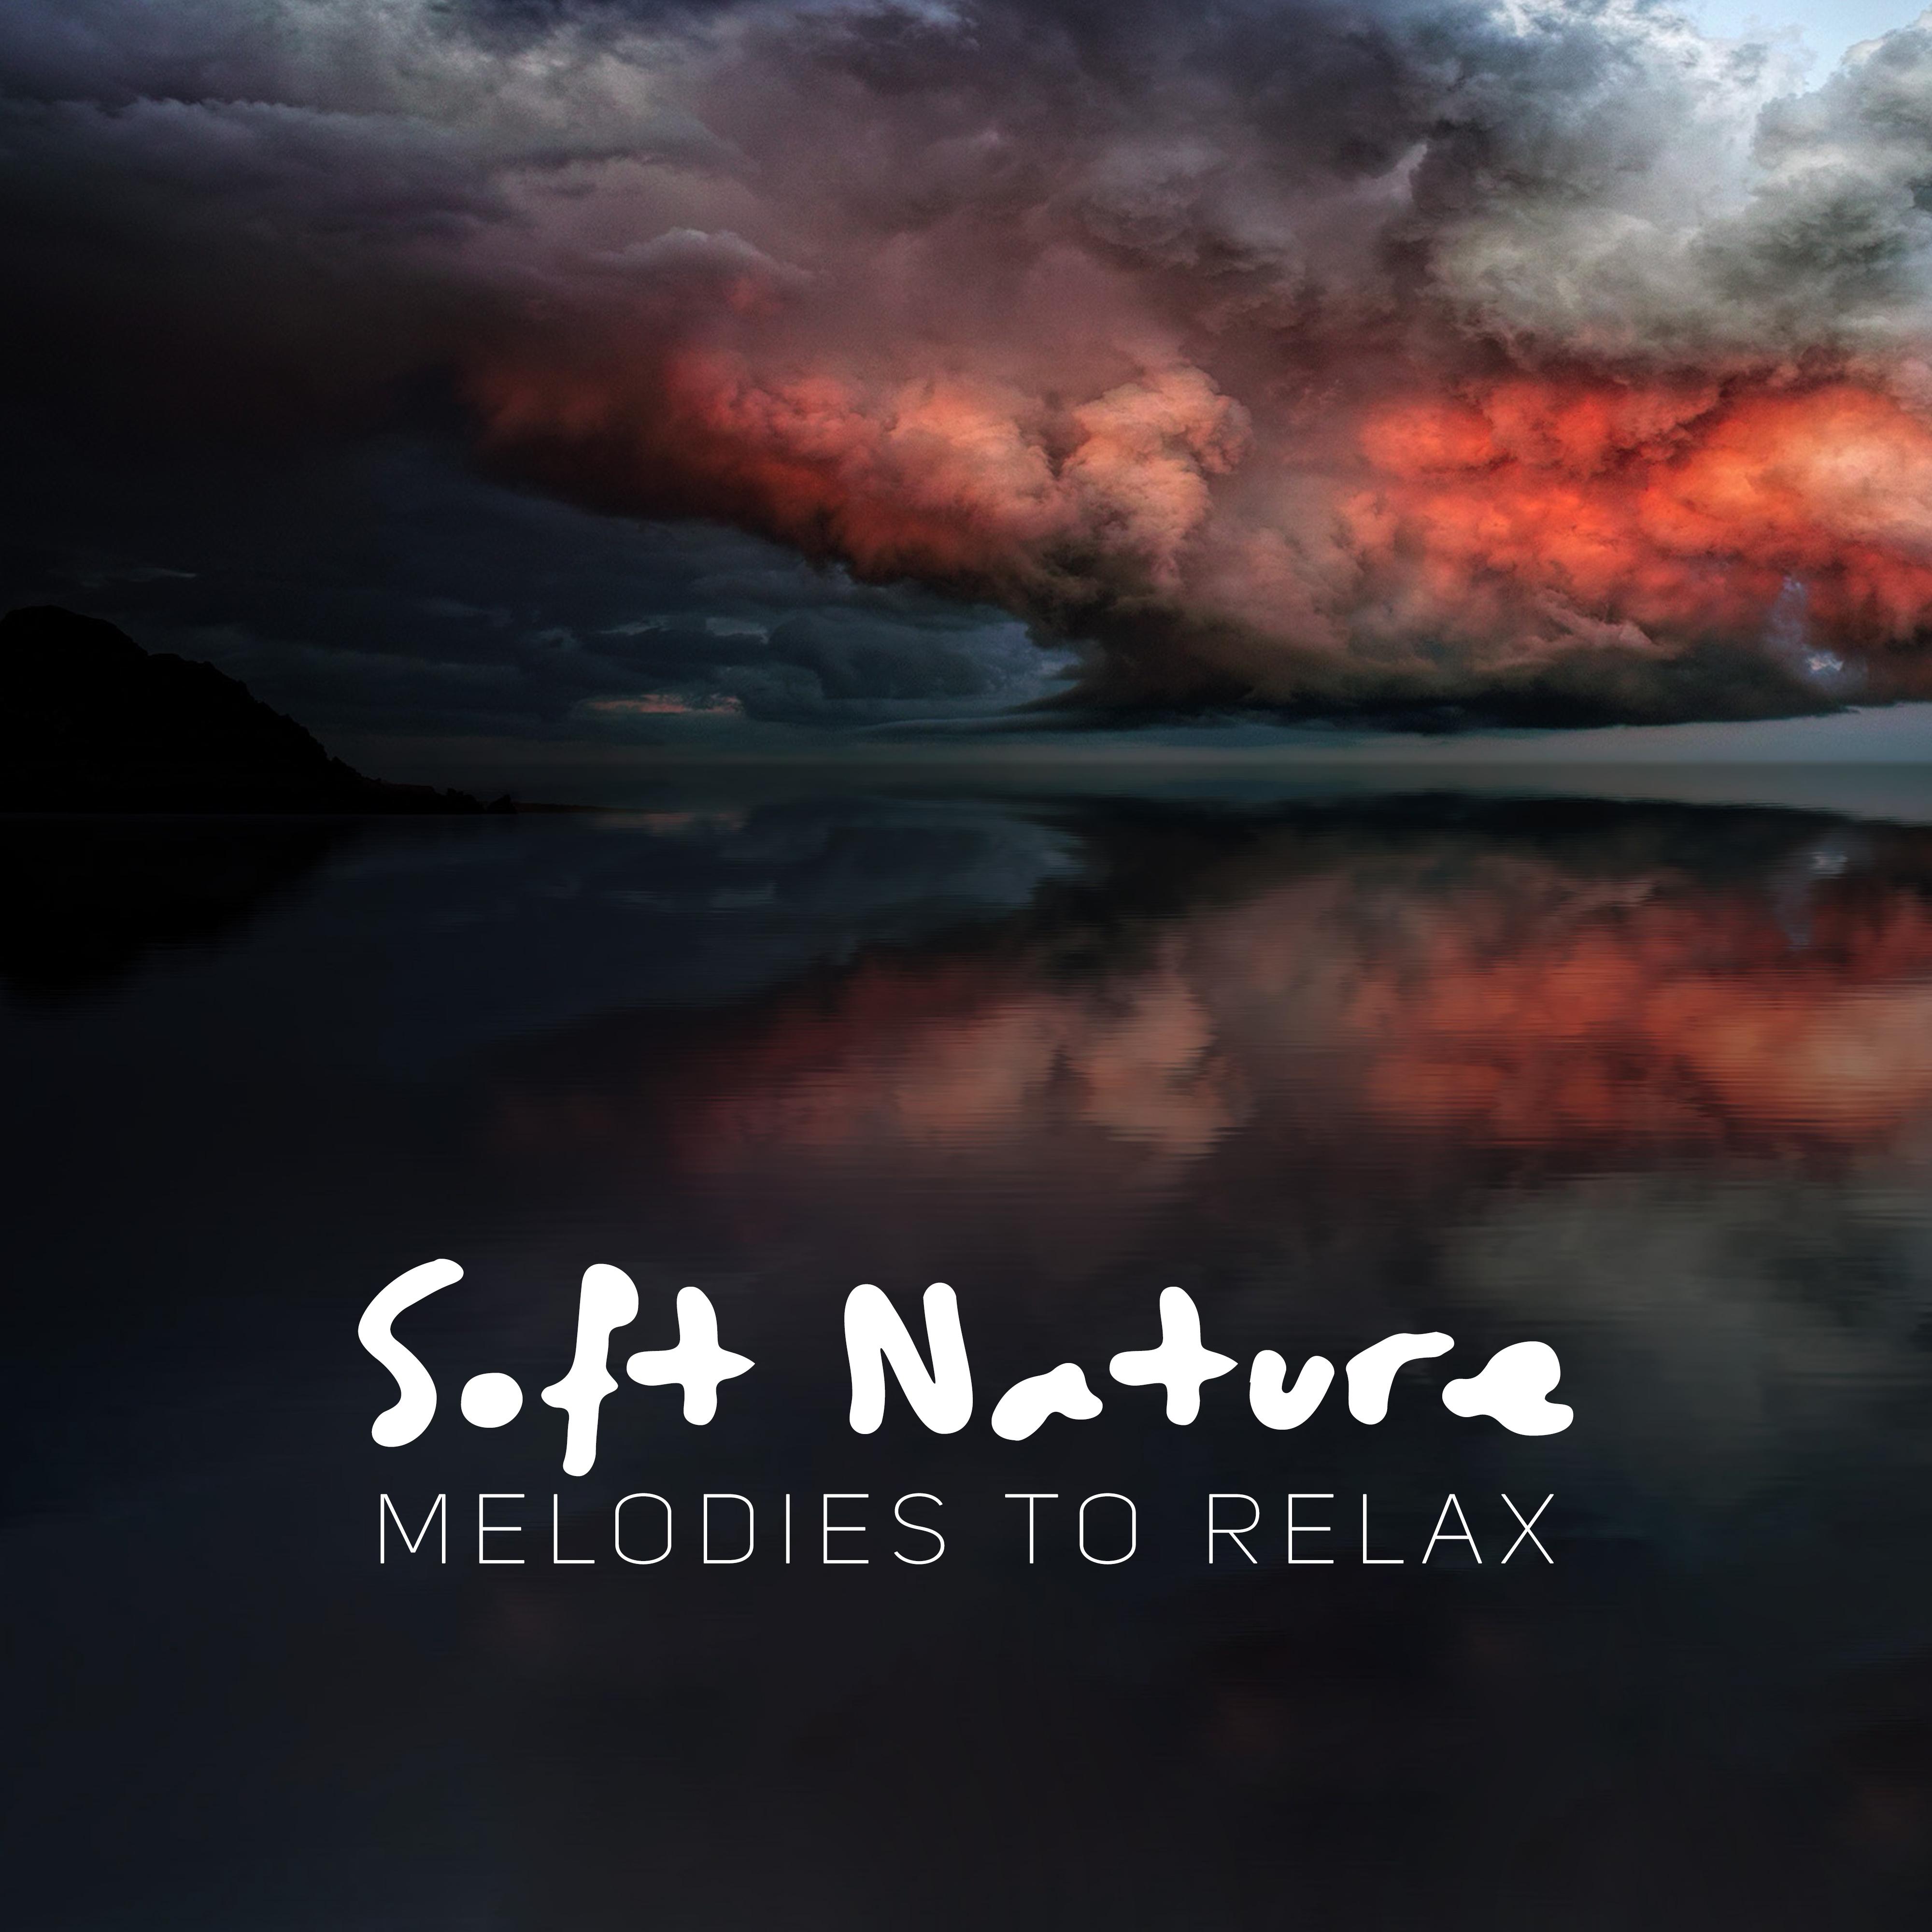 Soft Nature Melodies to Relax